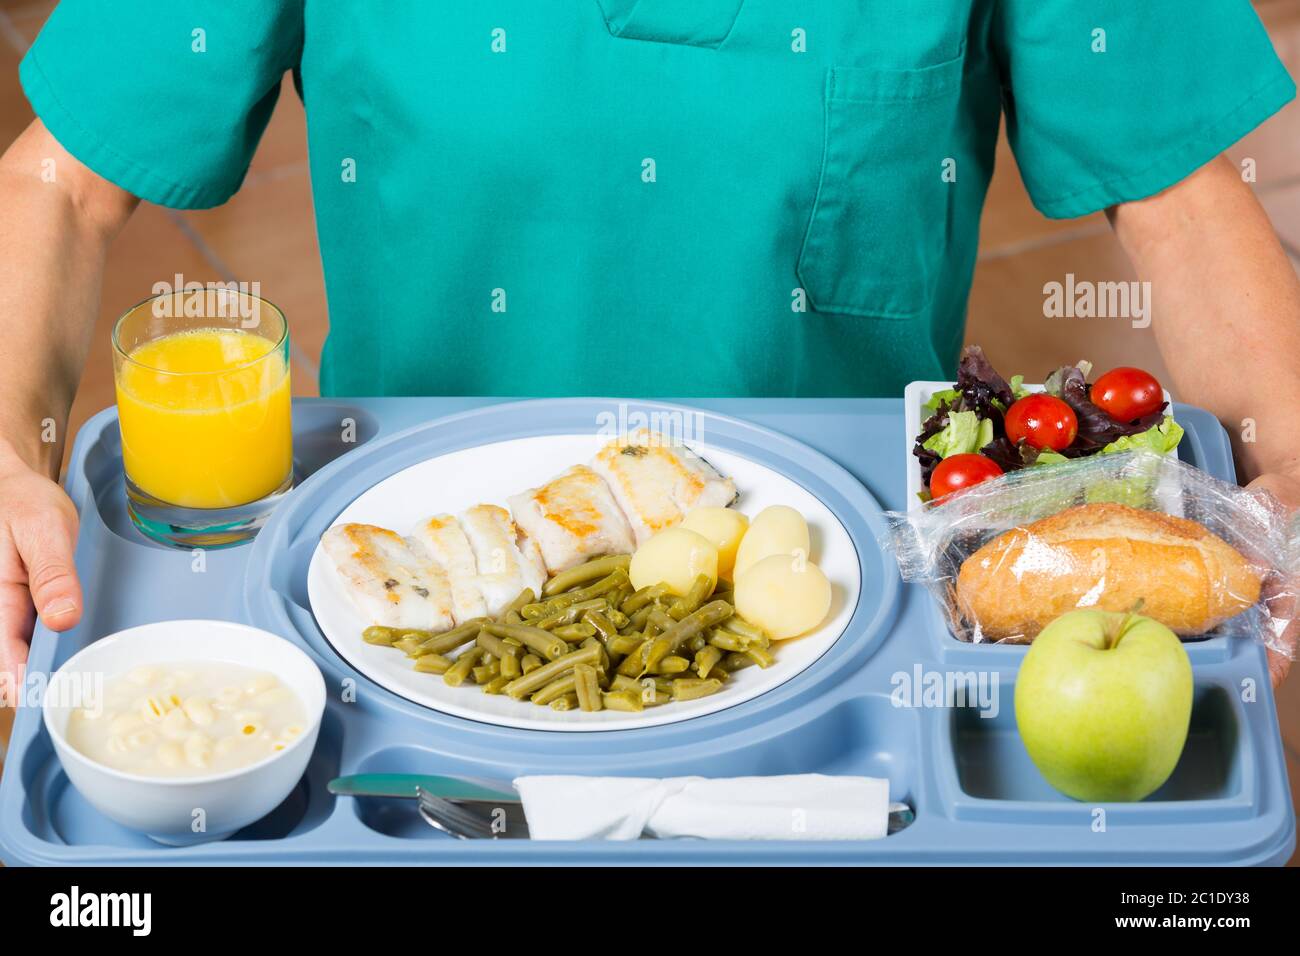 Health professional with a tray of food to a patient Stock Photo